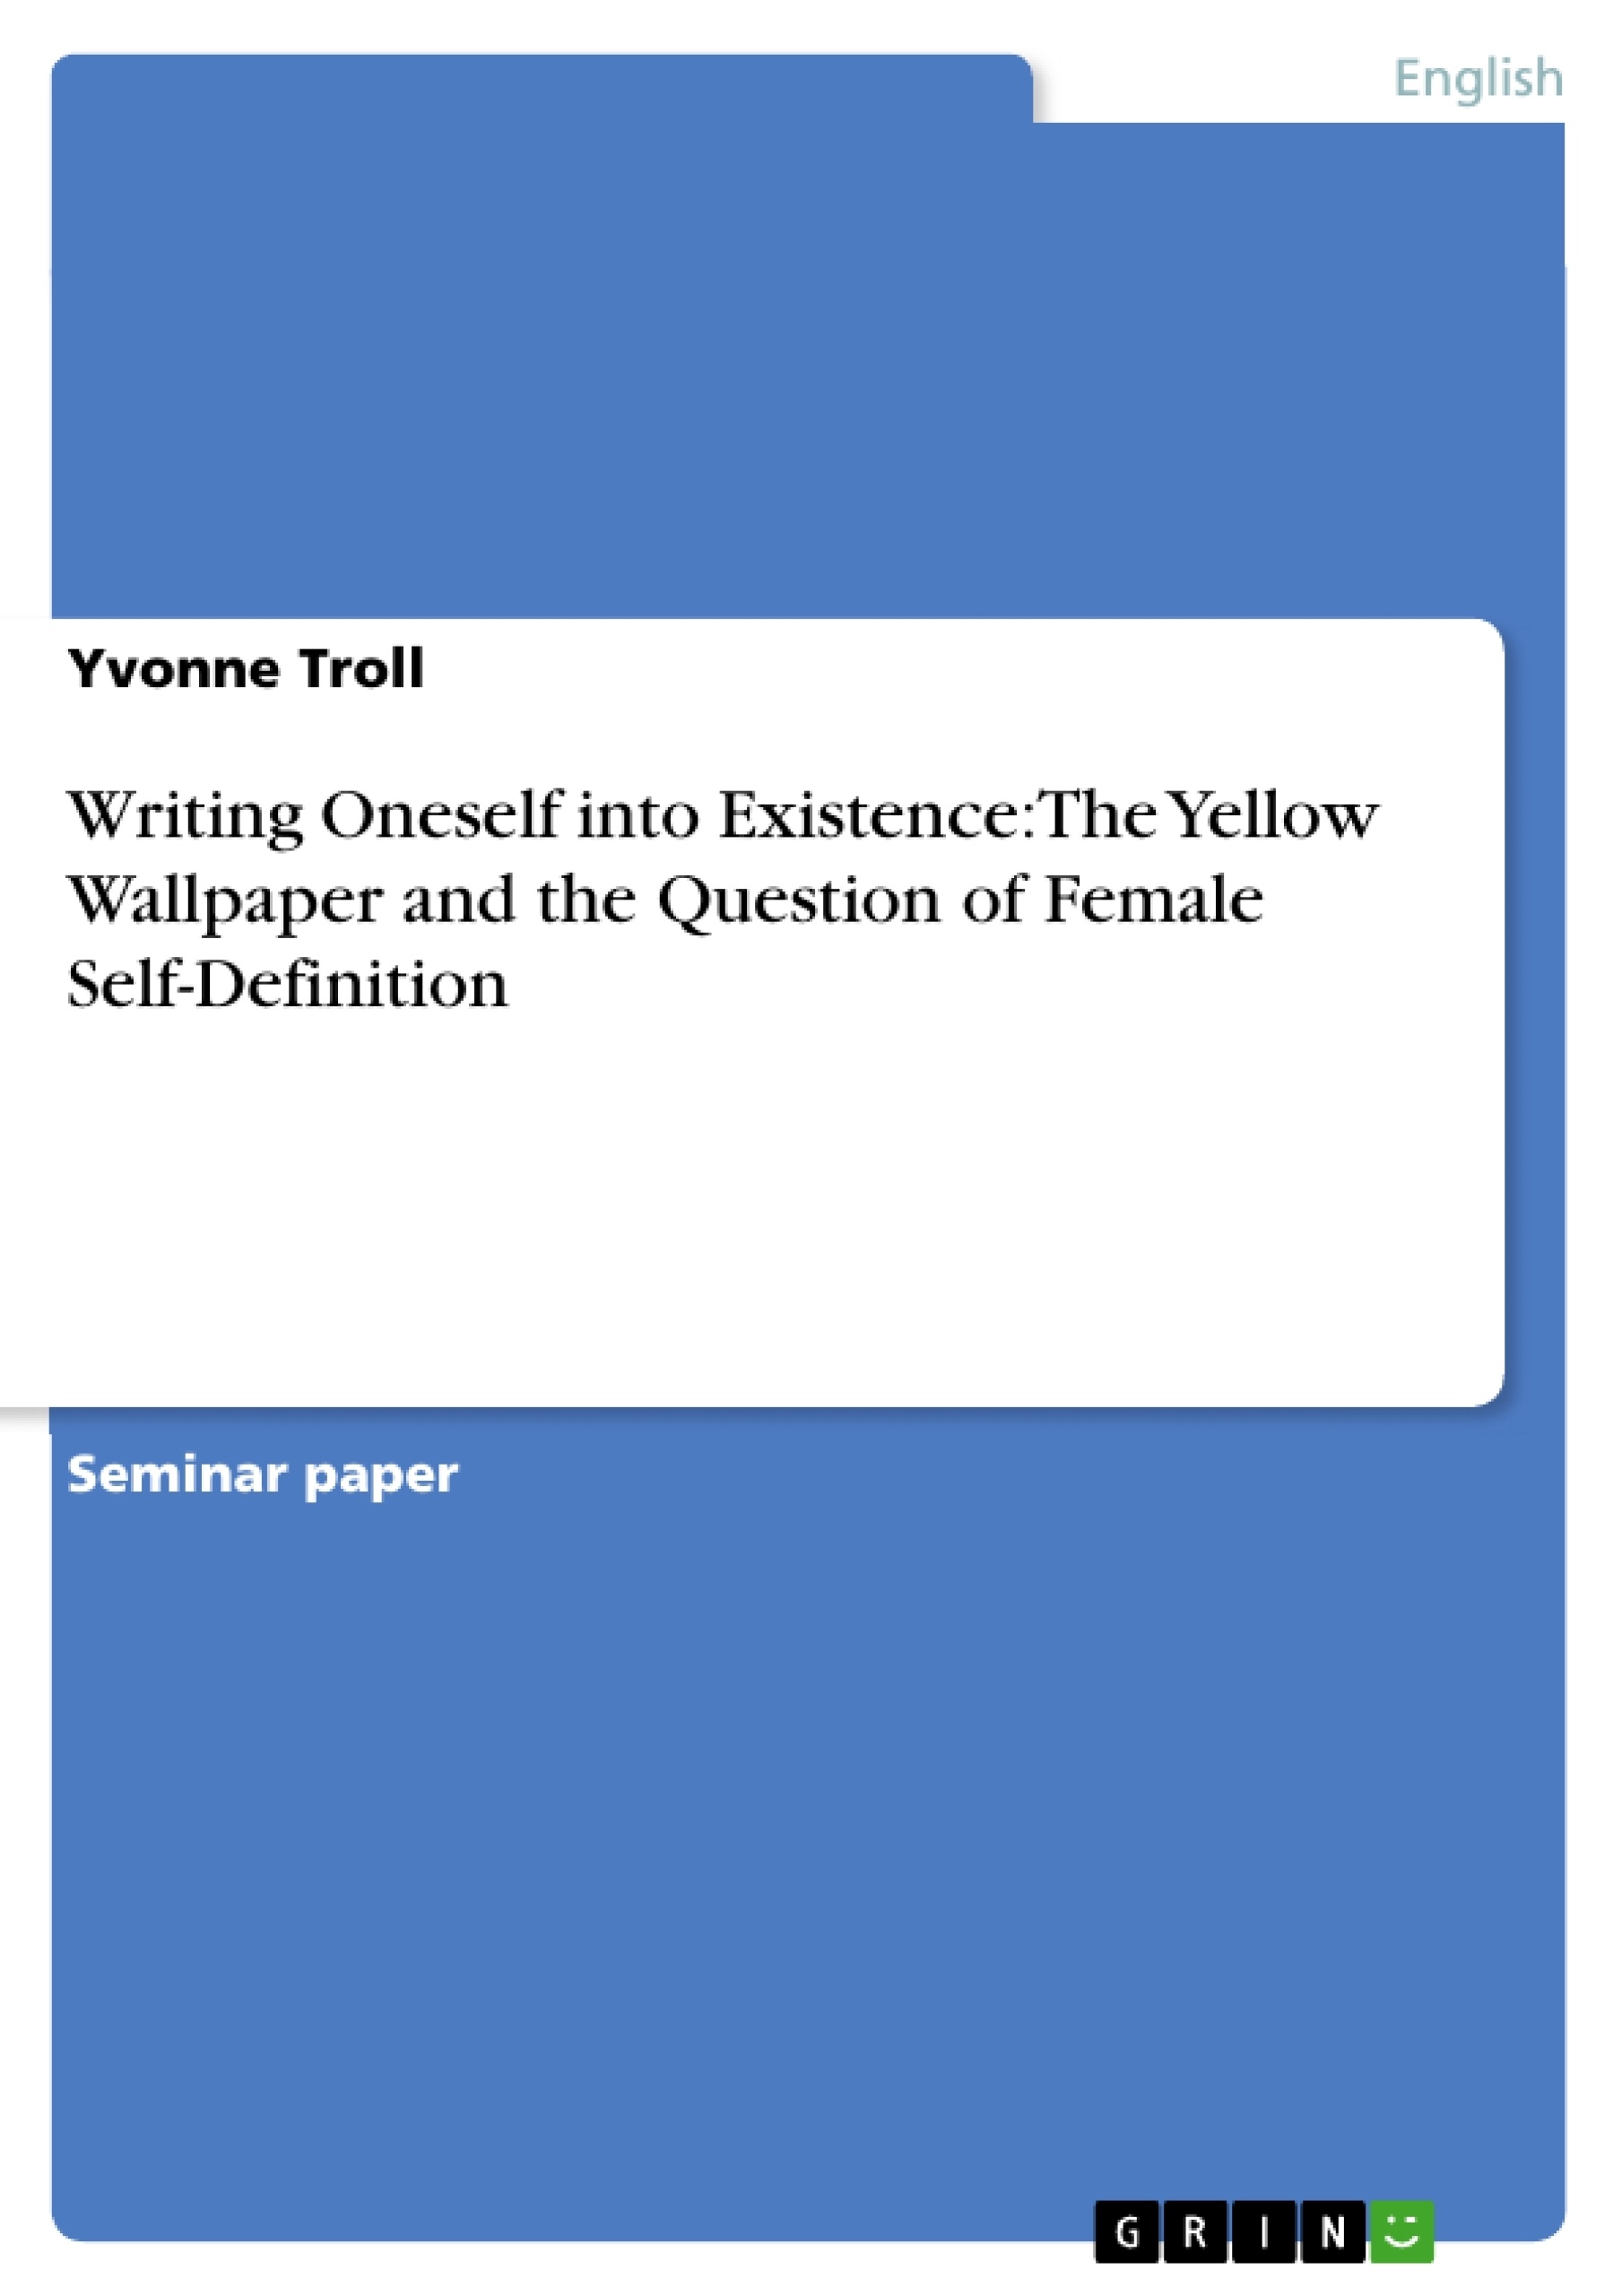 Titre: Writing Oneself into Existence: The Yellow Wallpaper and the Question of Female Self-Definition